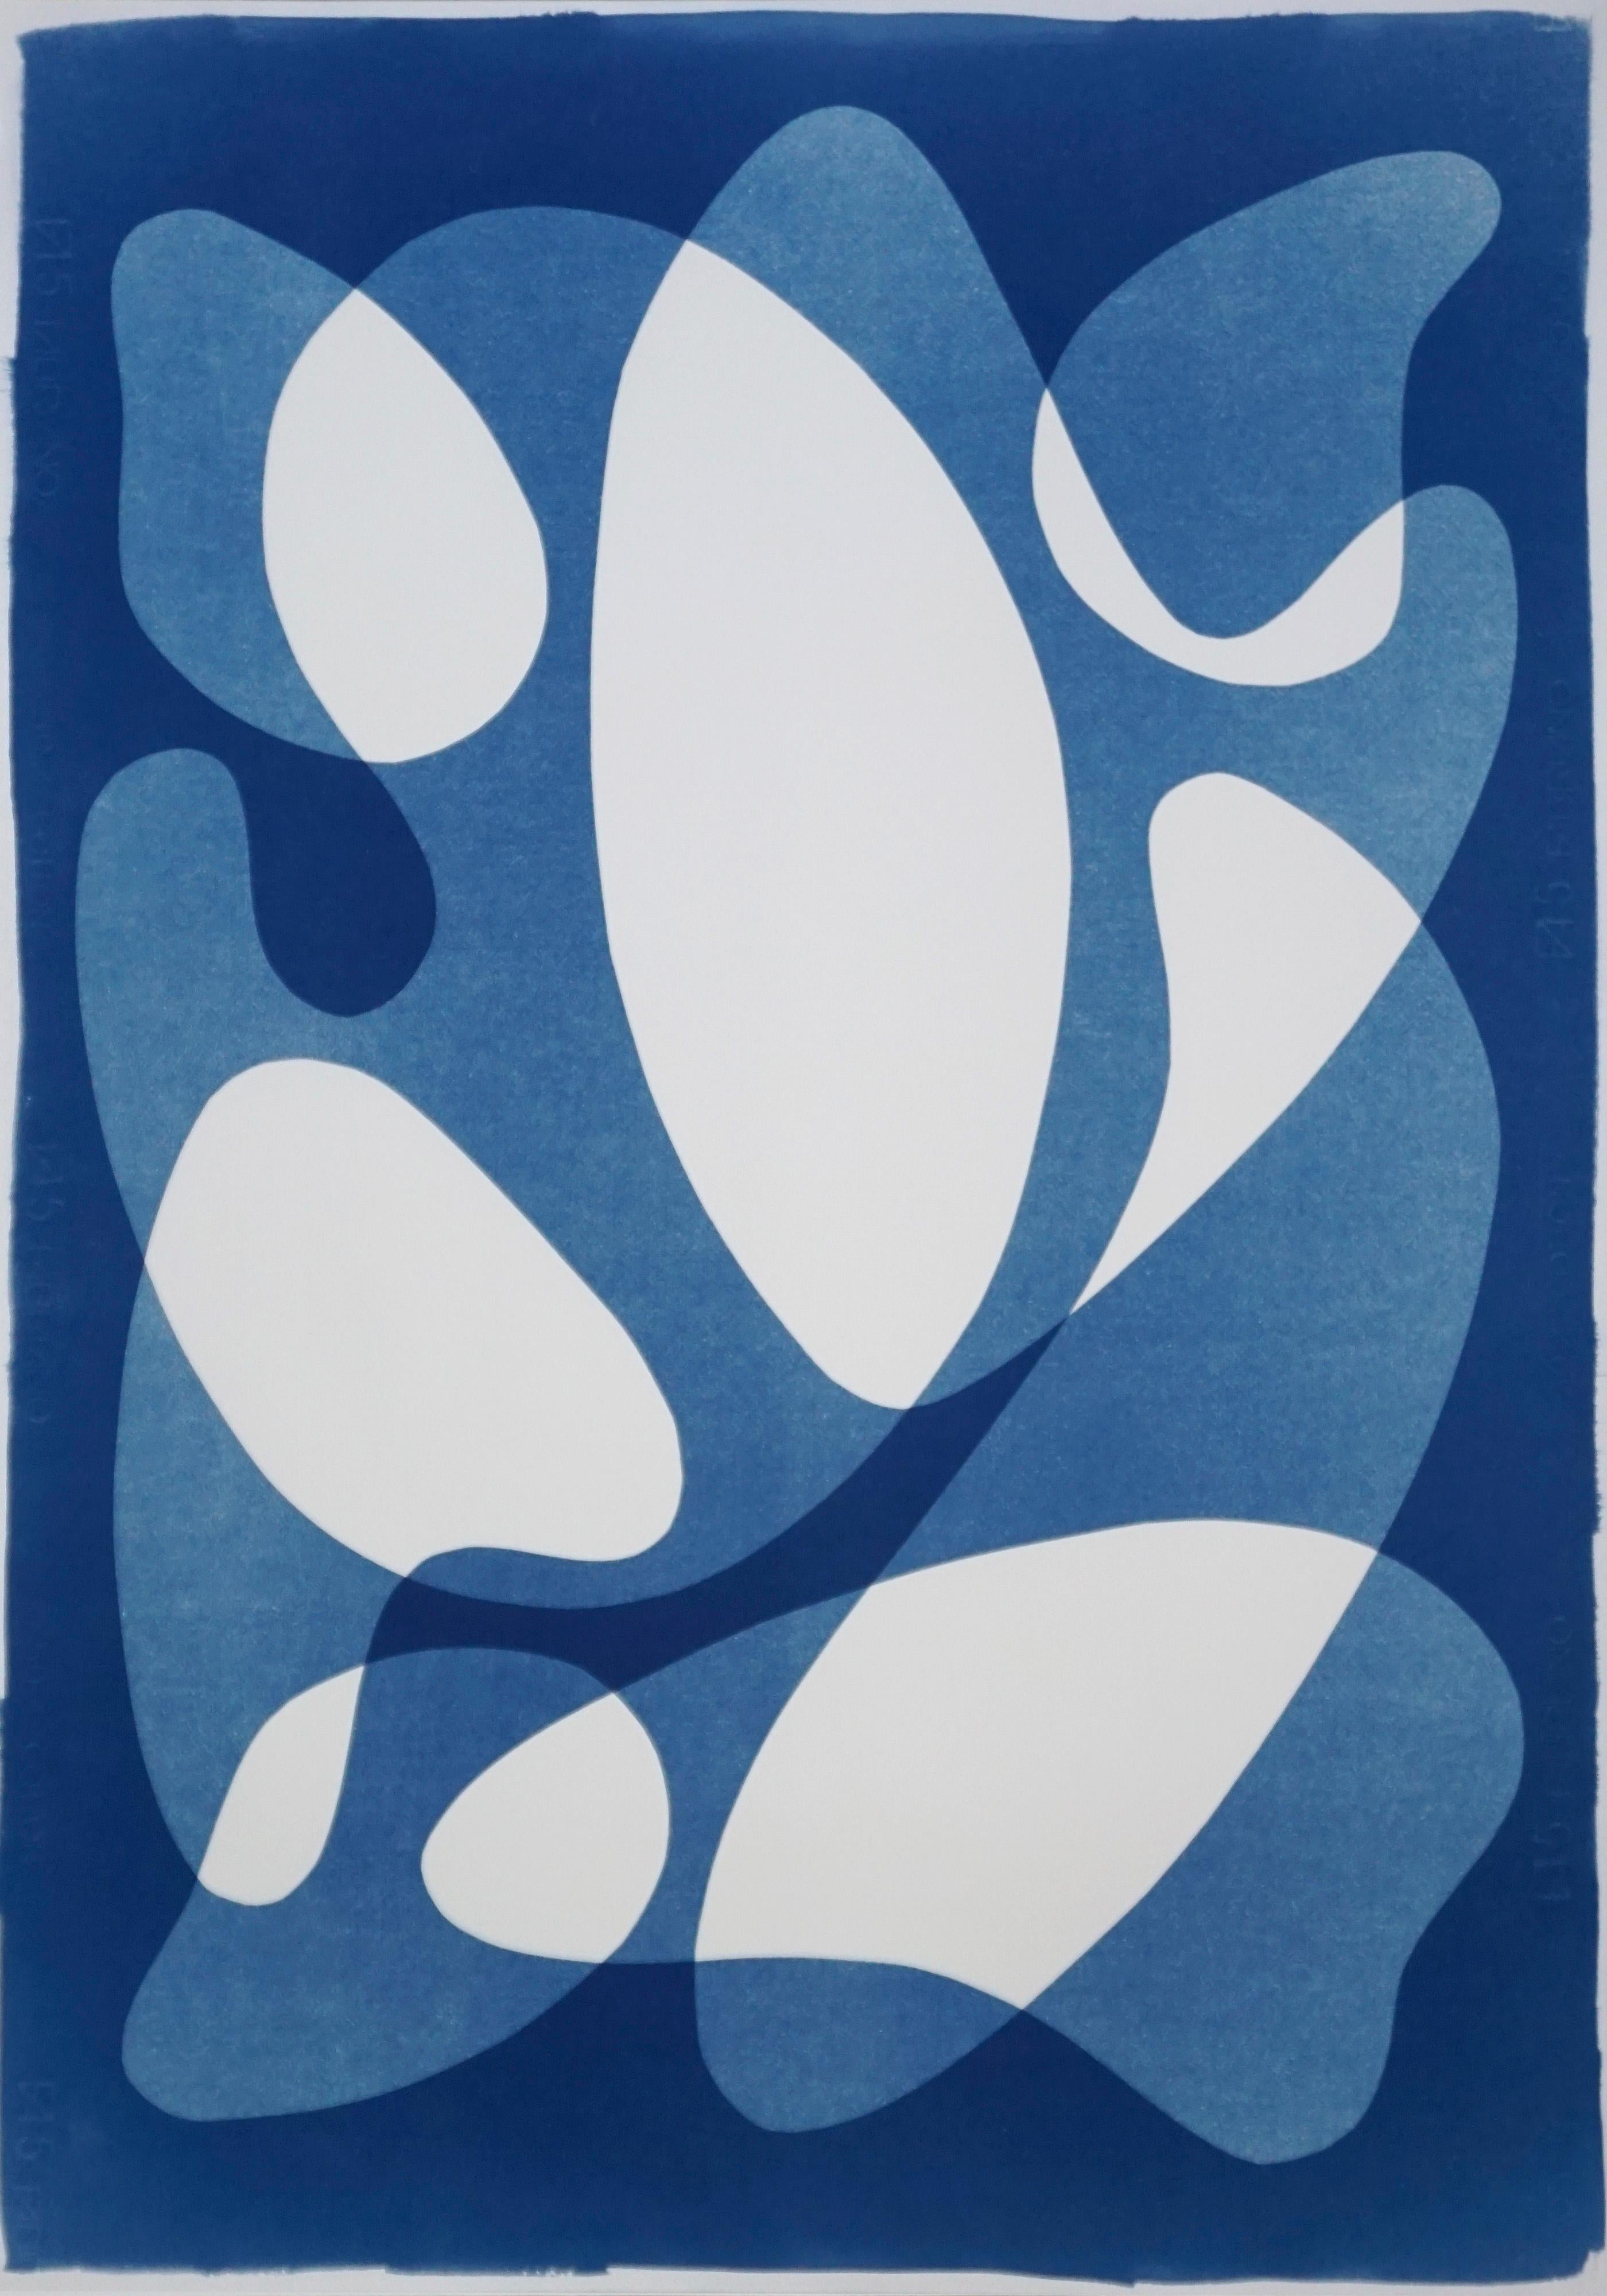 Blue Flowing Curved Shapes, Modern Mid-Century Print on Paper, Blues, Neutral 